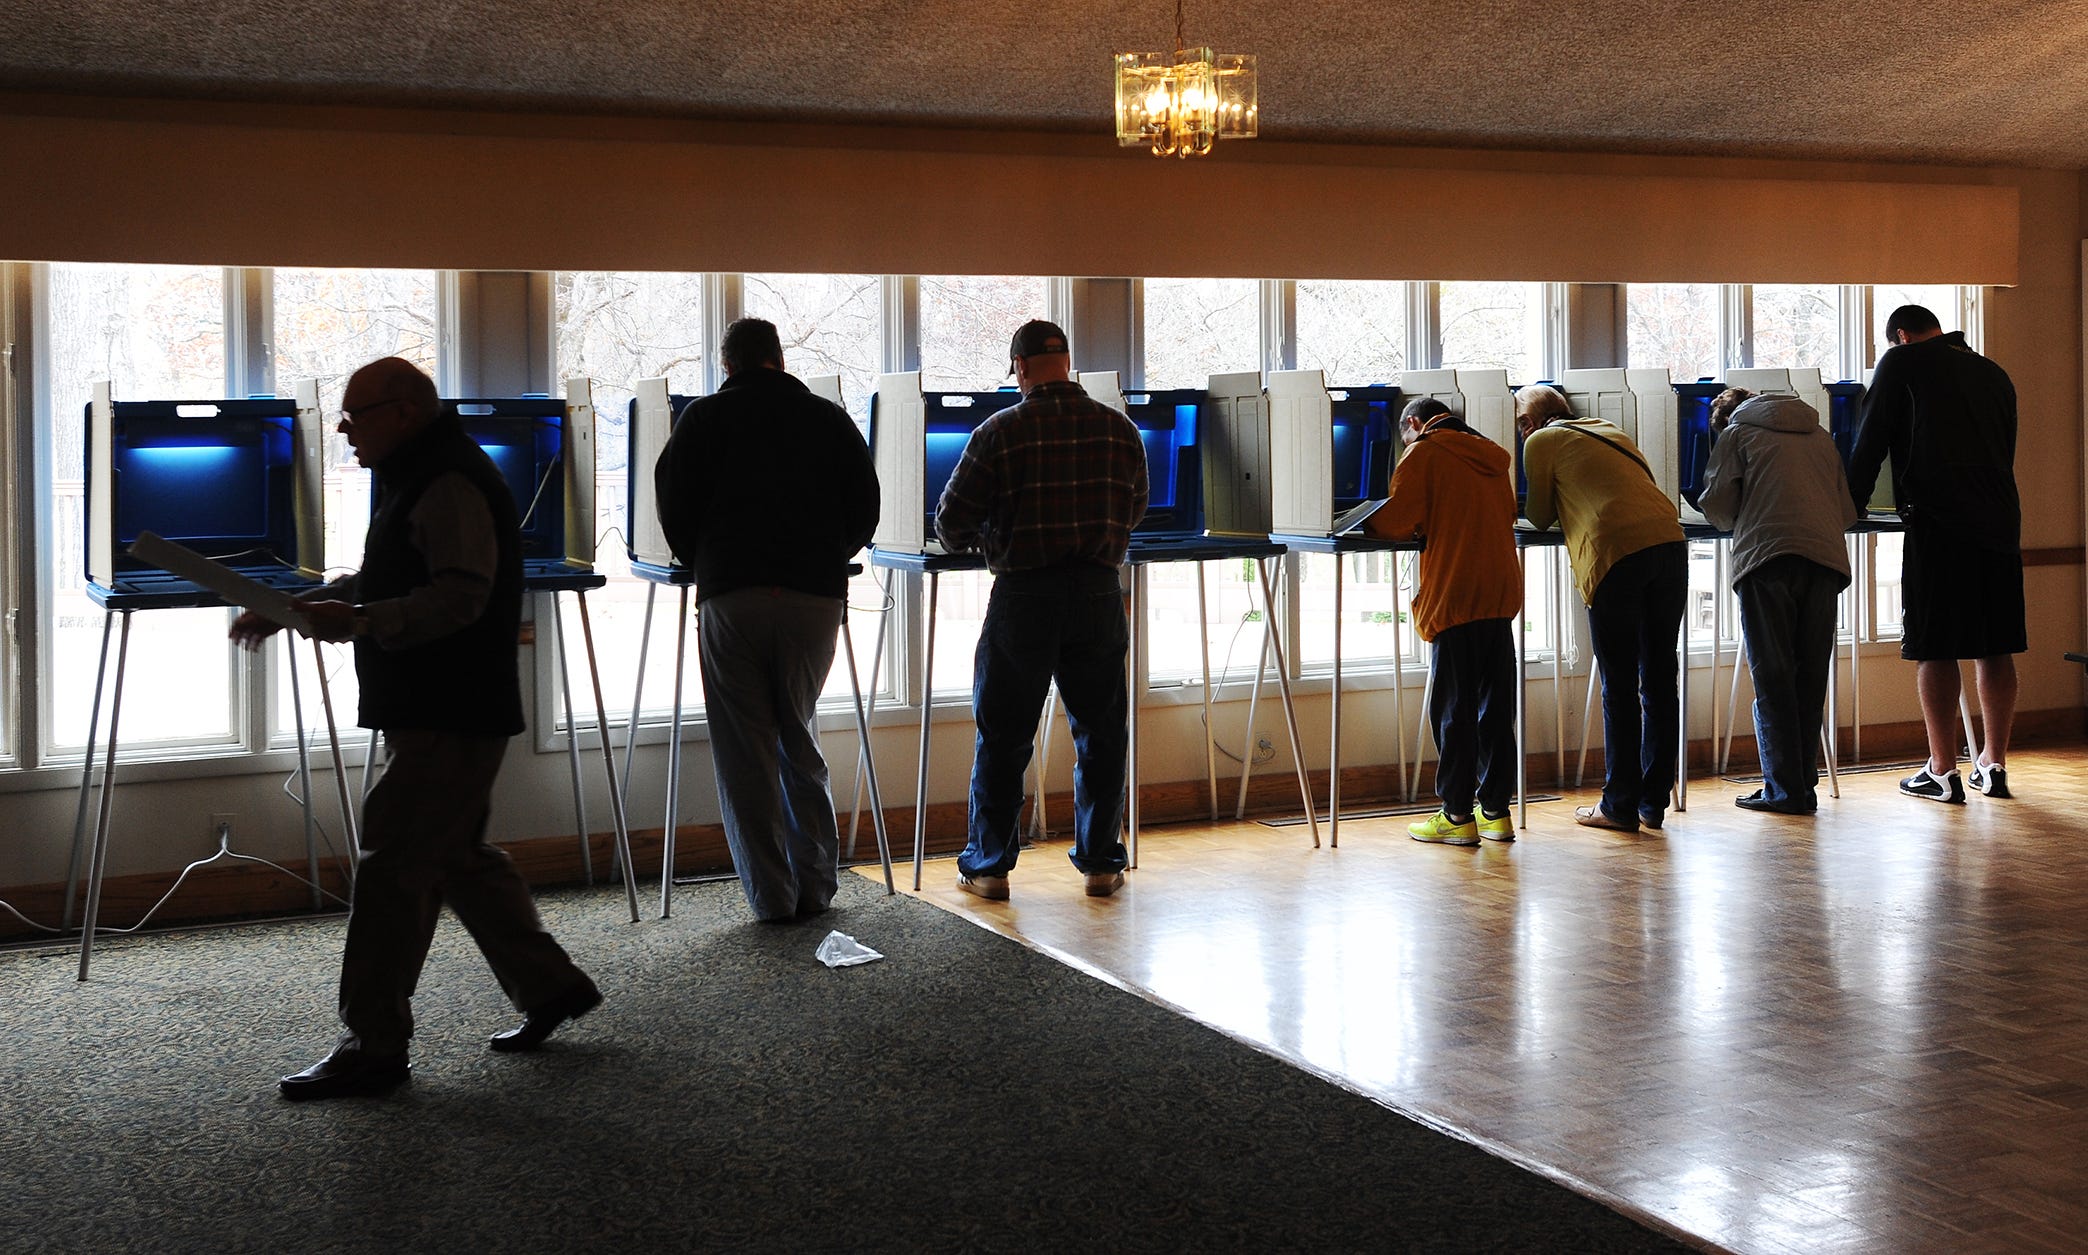 Voters line up to cast their ballots at the Rochester Community House on November 4, 2014.